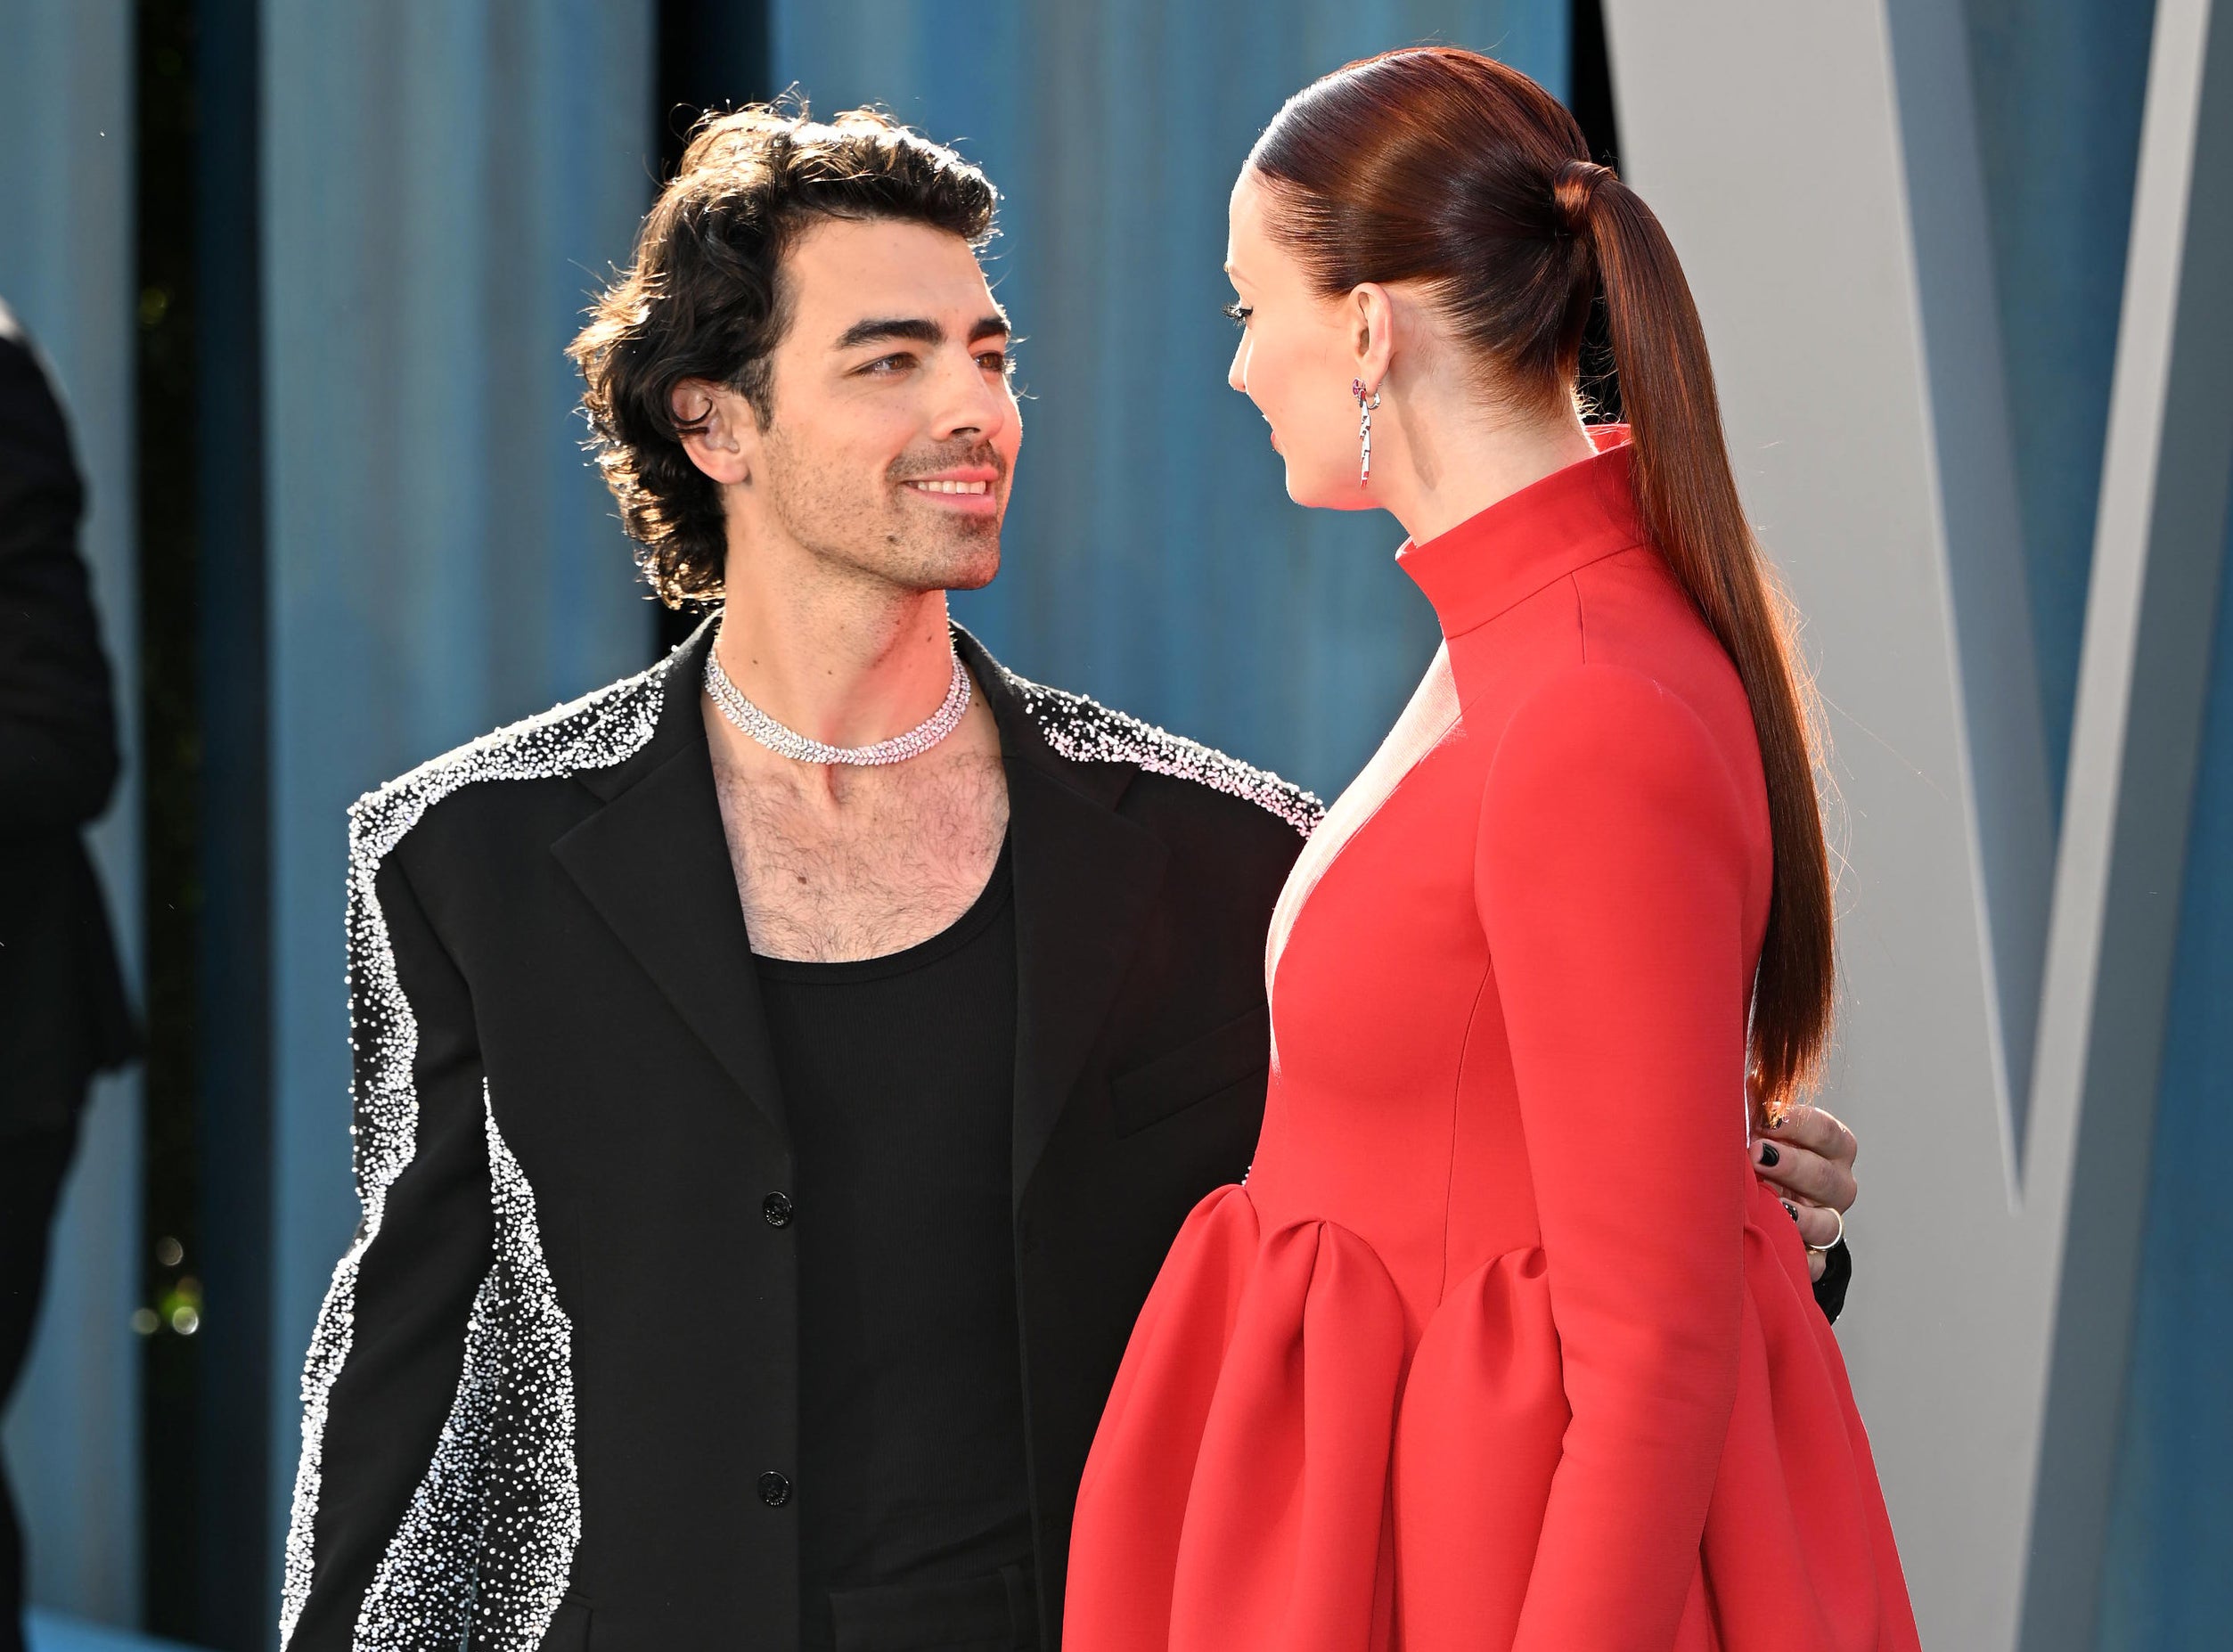 Joe looks at Sophie and smiles in the same outfit